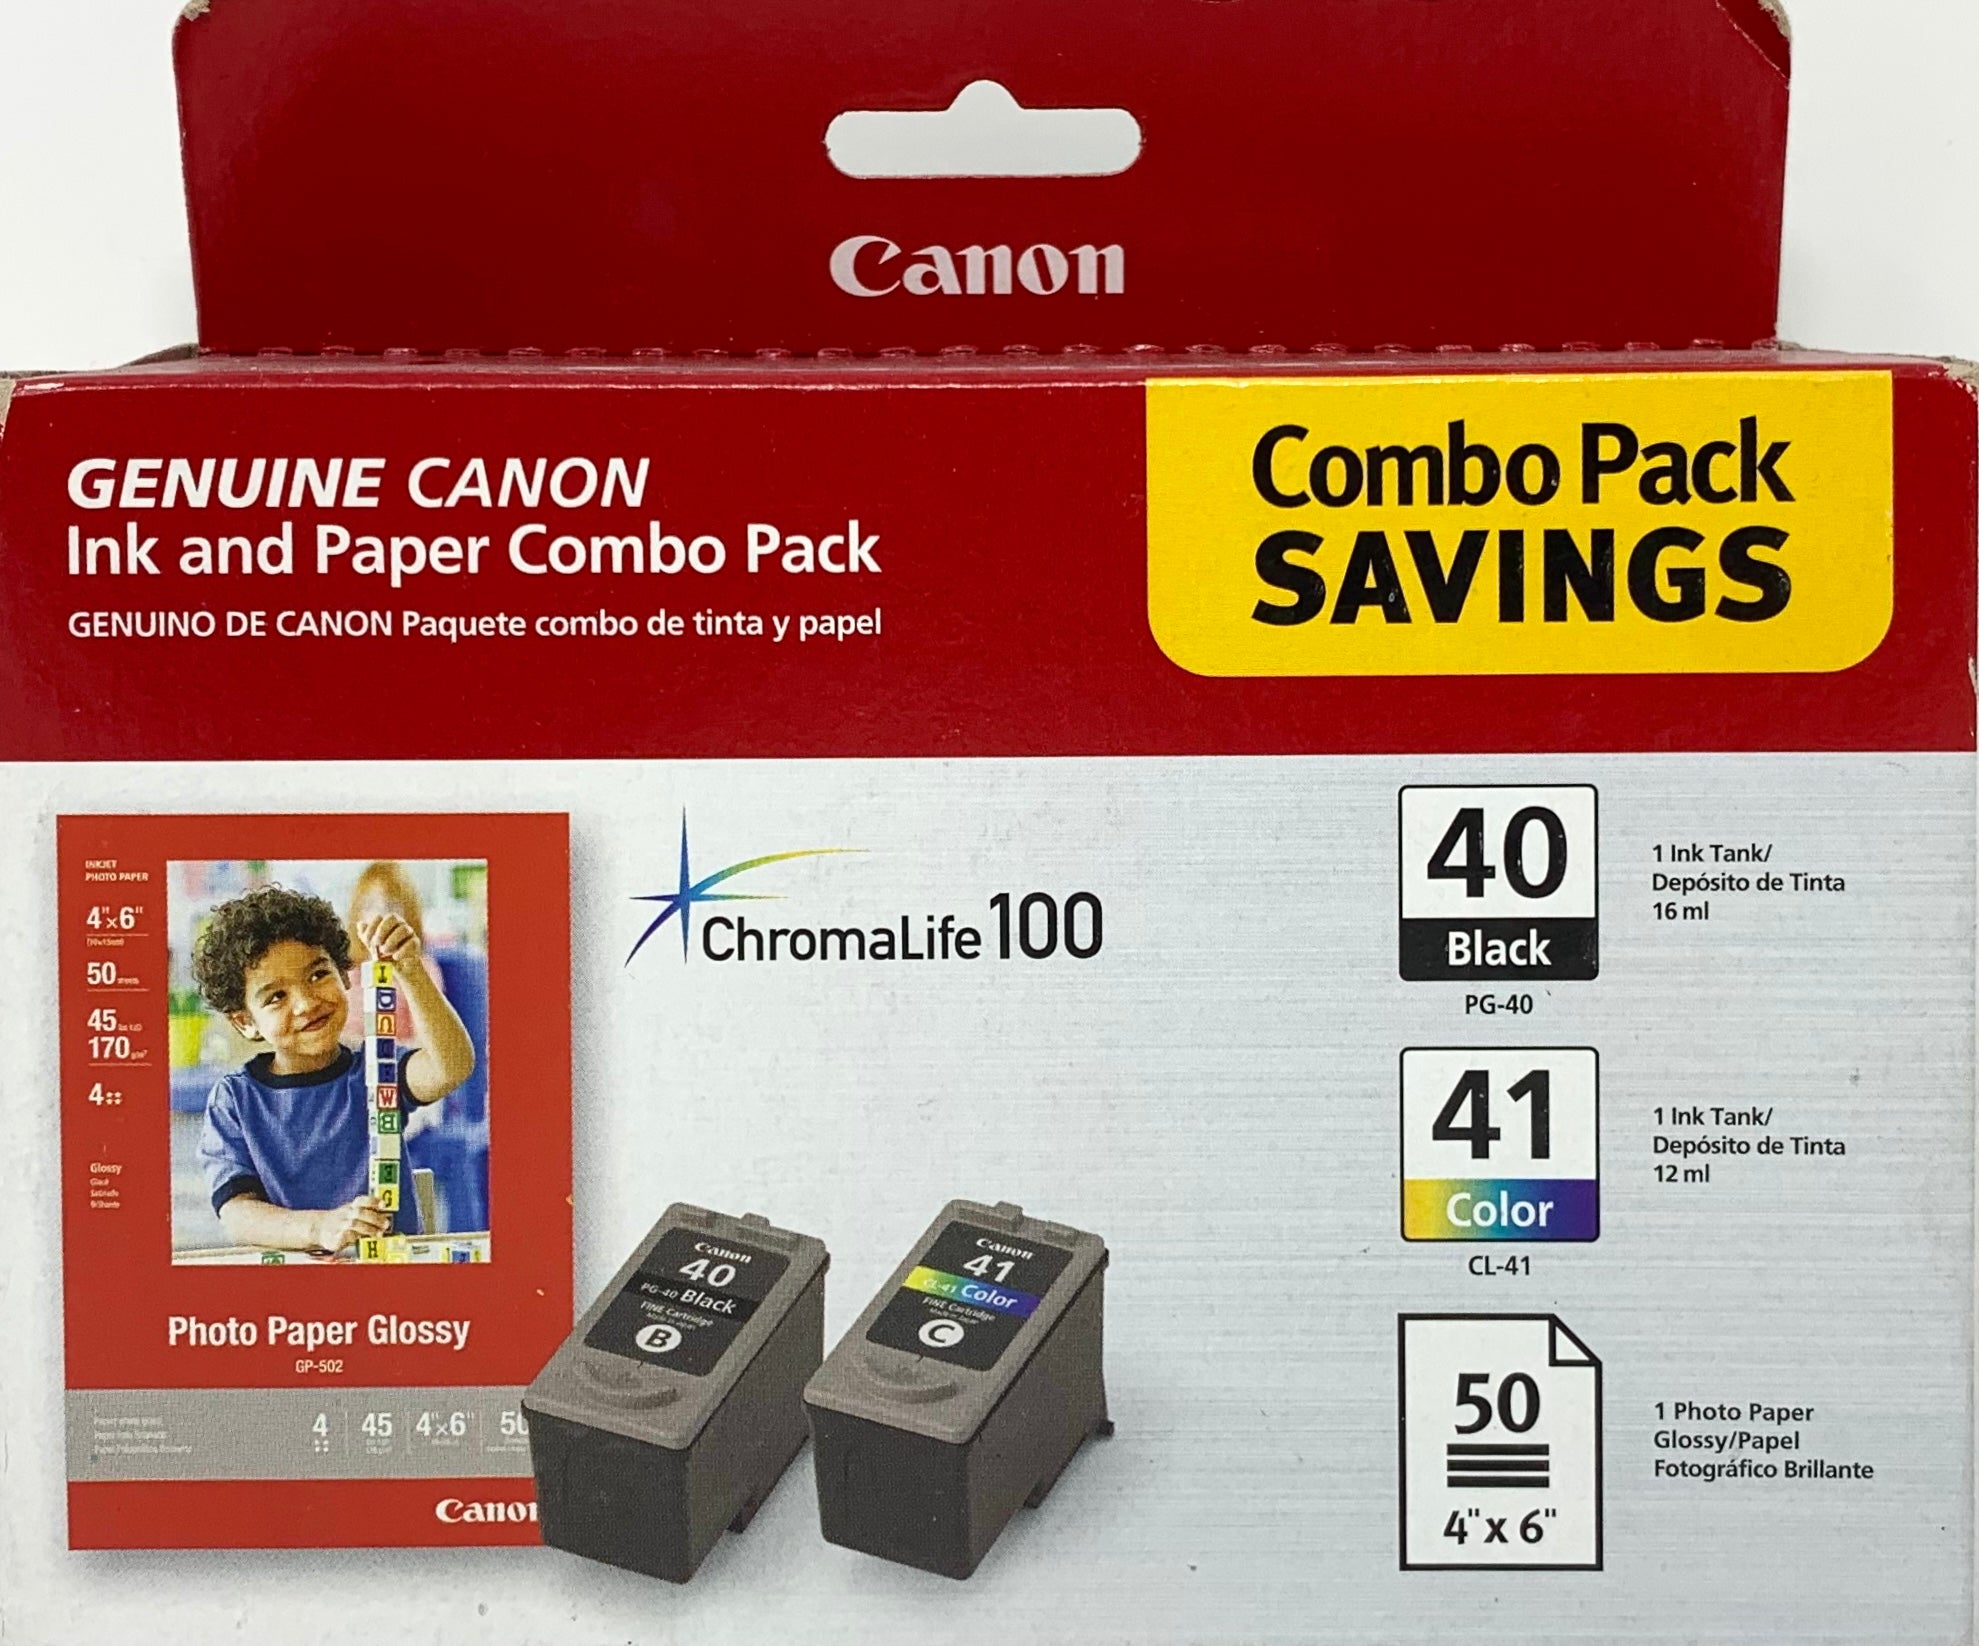 Genuine Canon PG-40/CL-41 Combo Ink Pack with Photo Paper Glossy